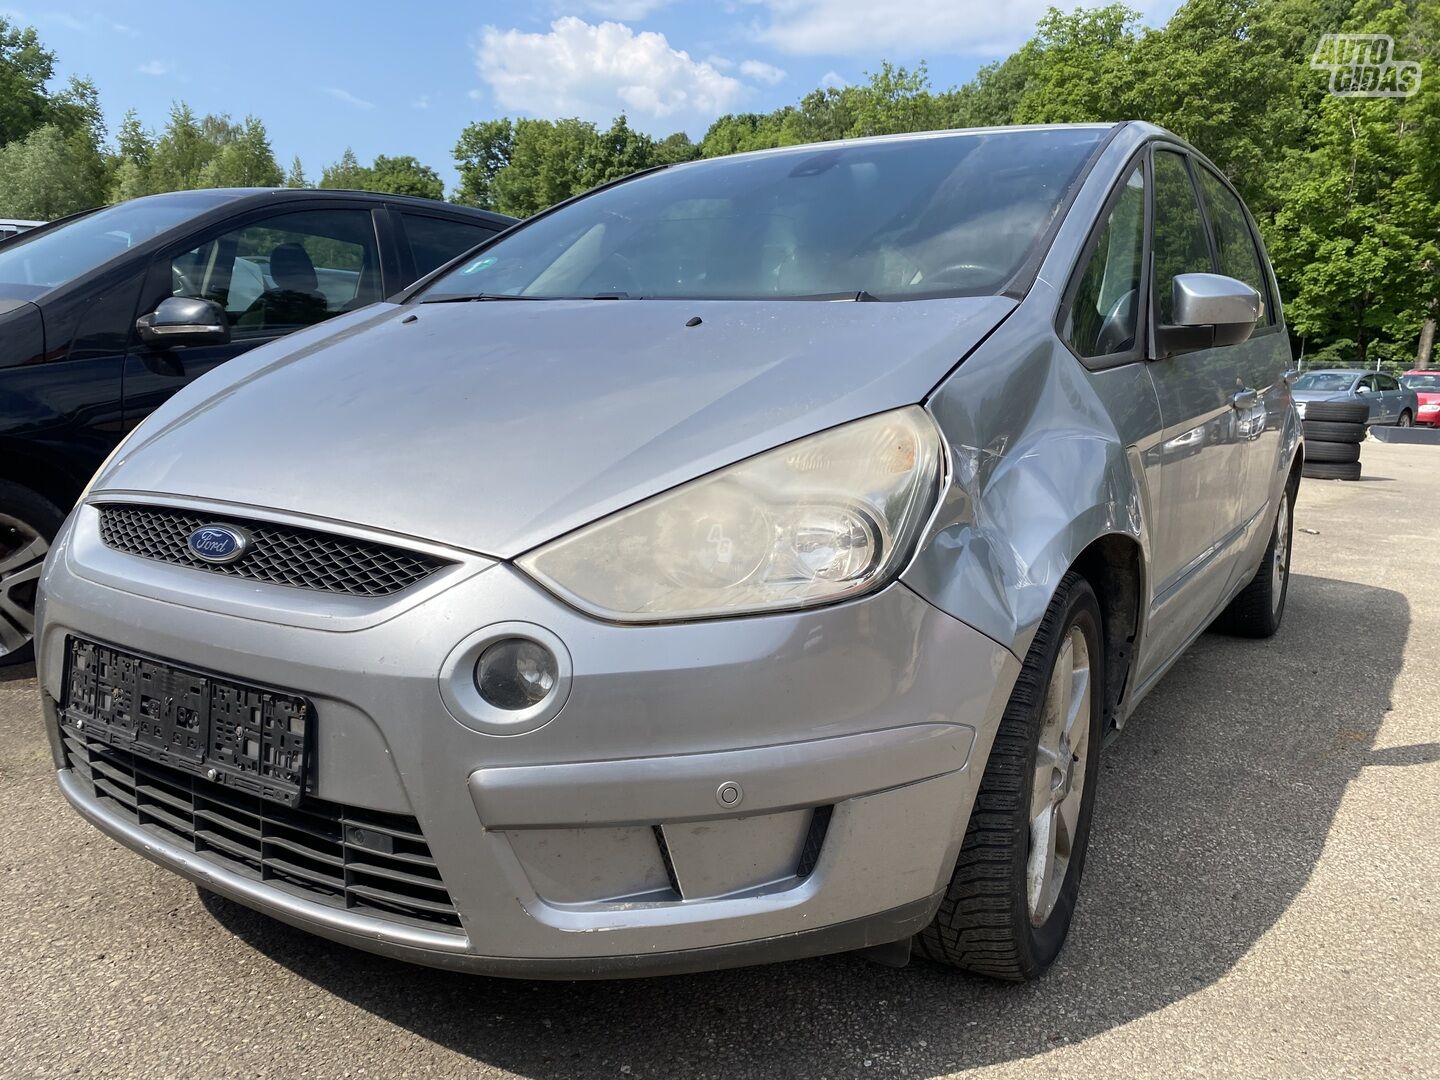 Ford S-MAX 2008 m dalys, Ford S-Max 2008 г запчясти